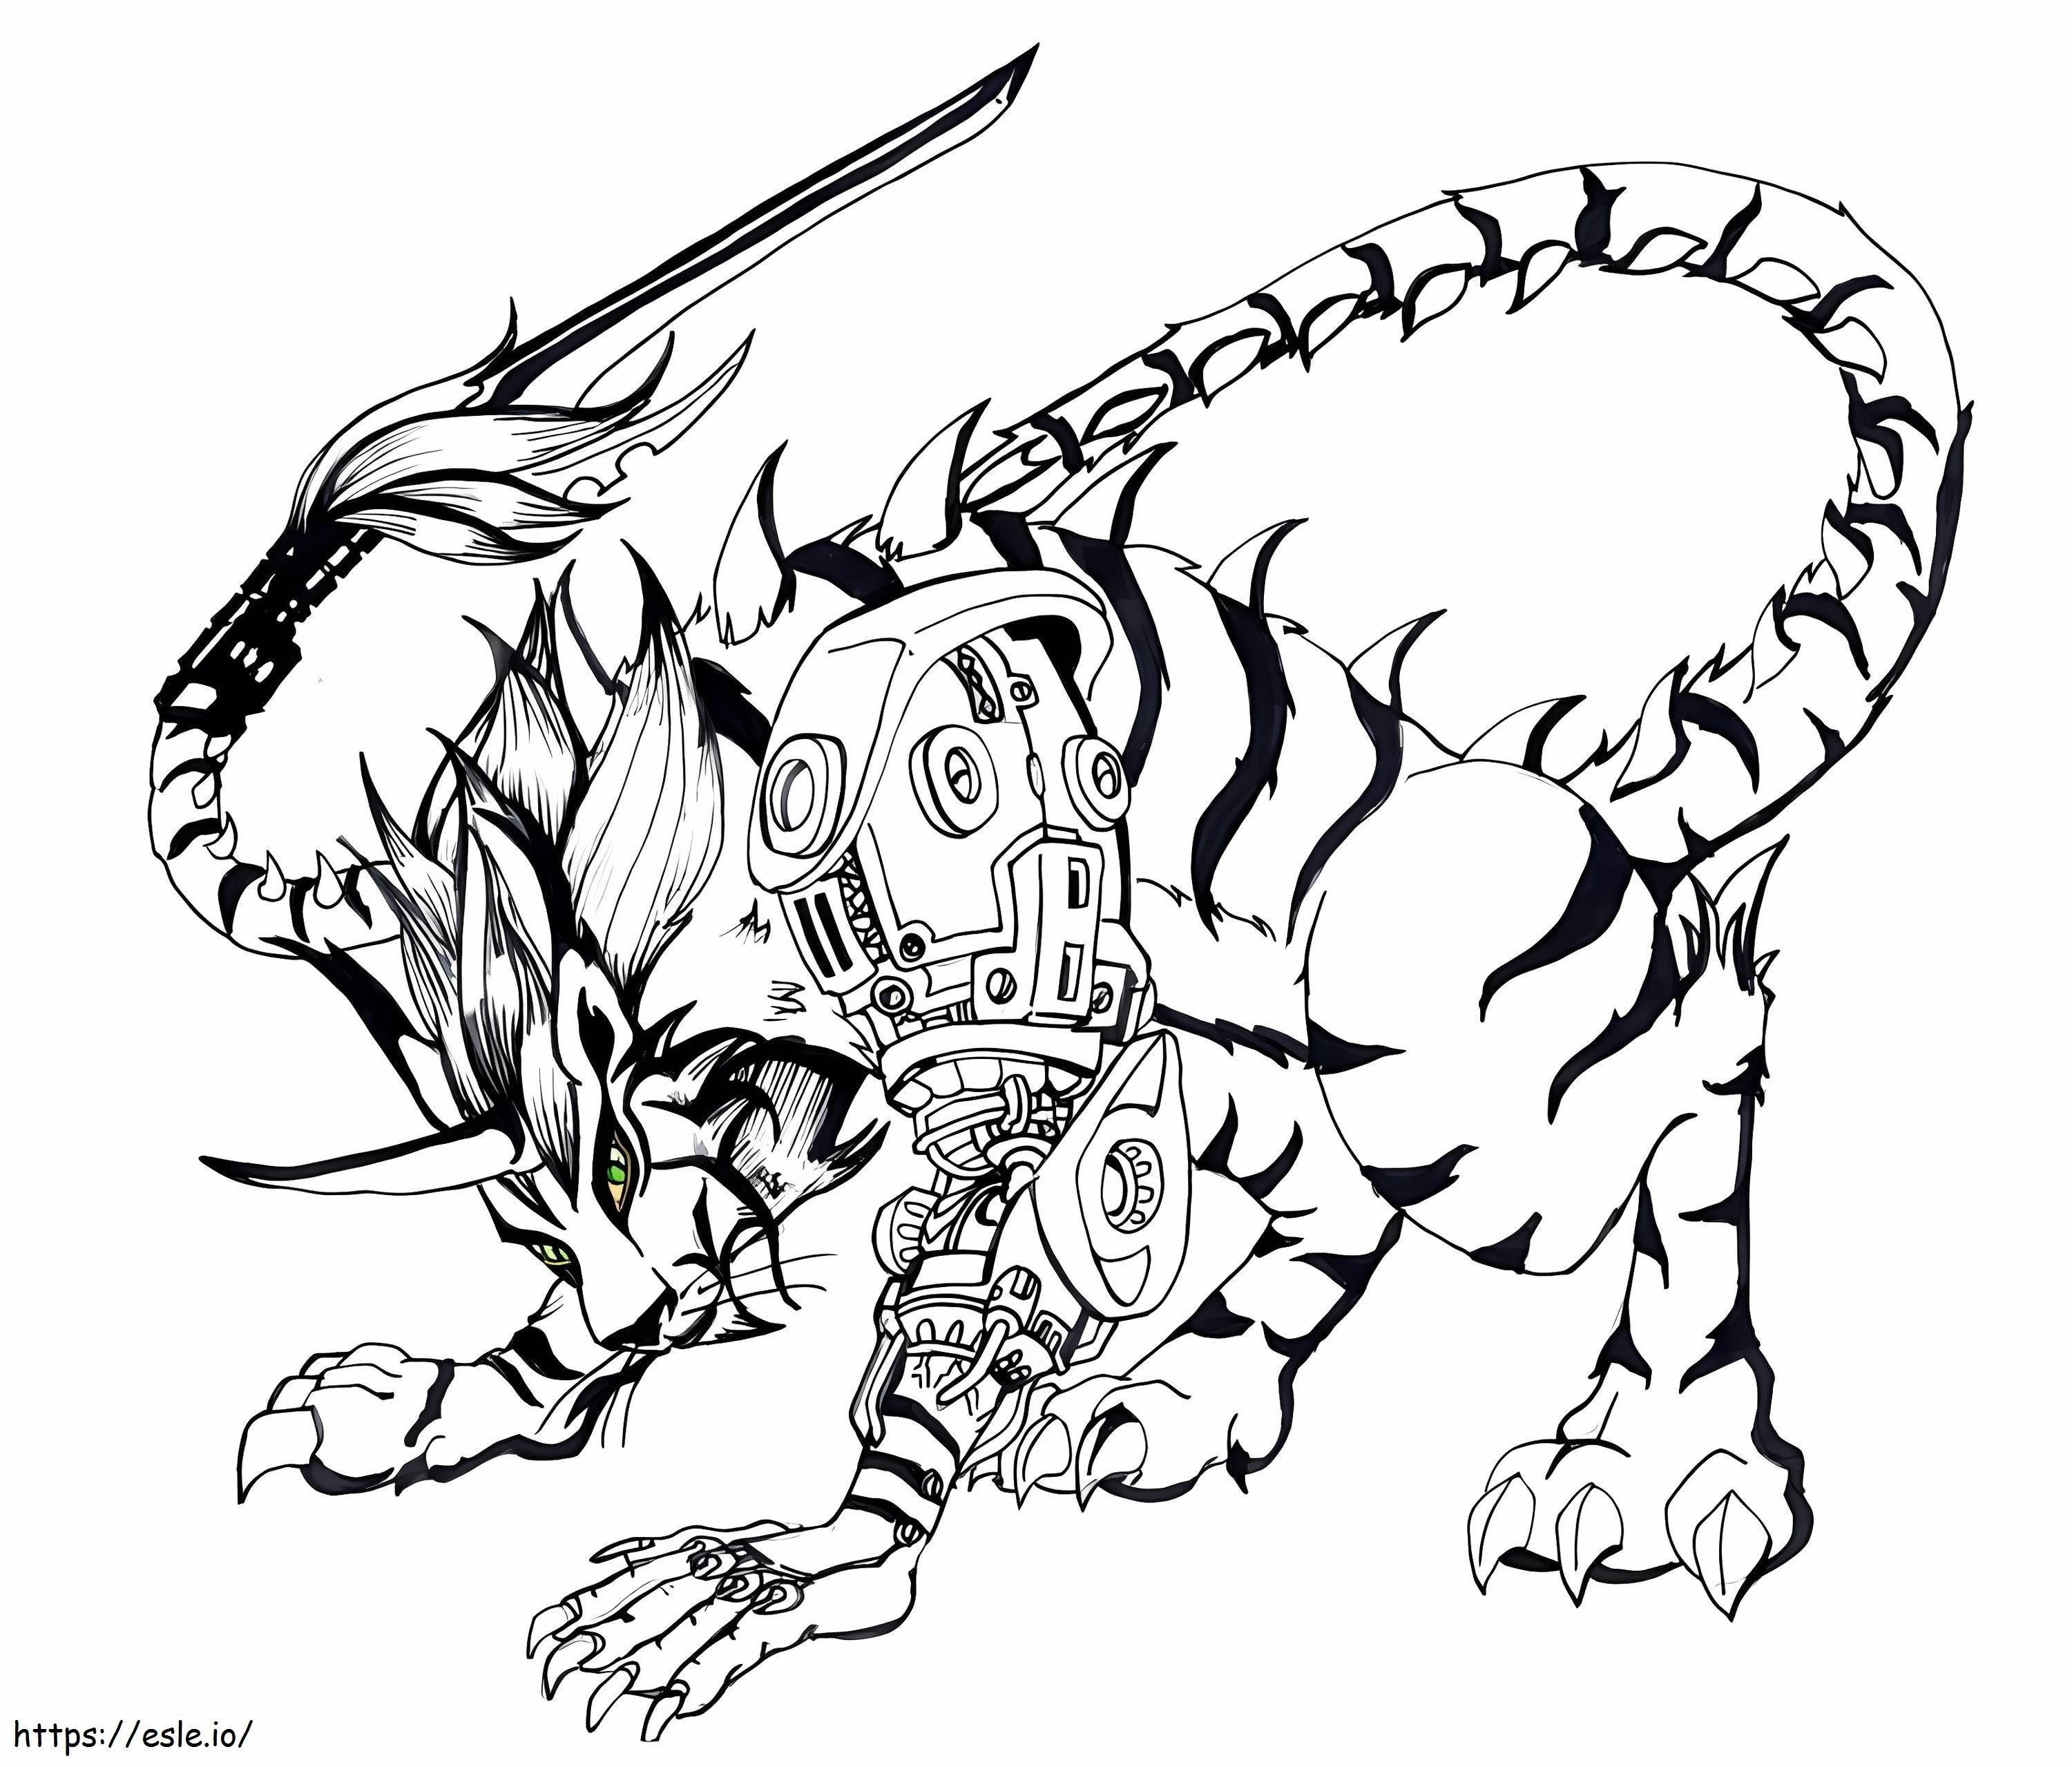 Fresh Lynx coloring page